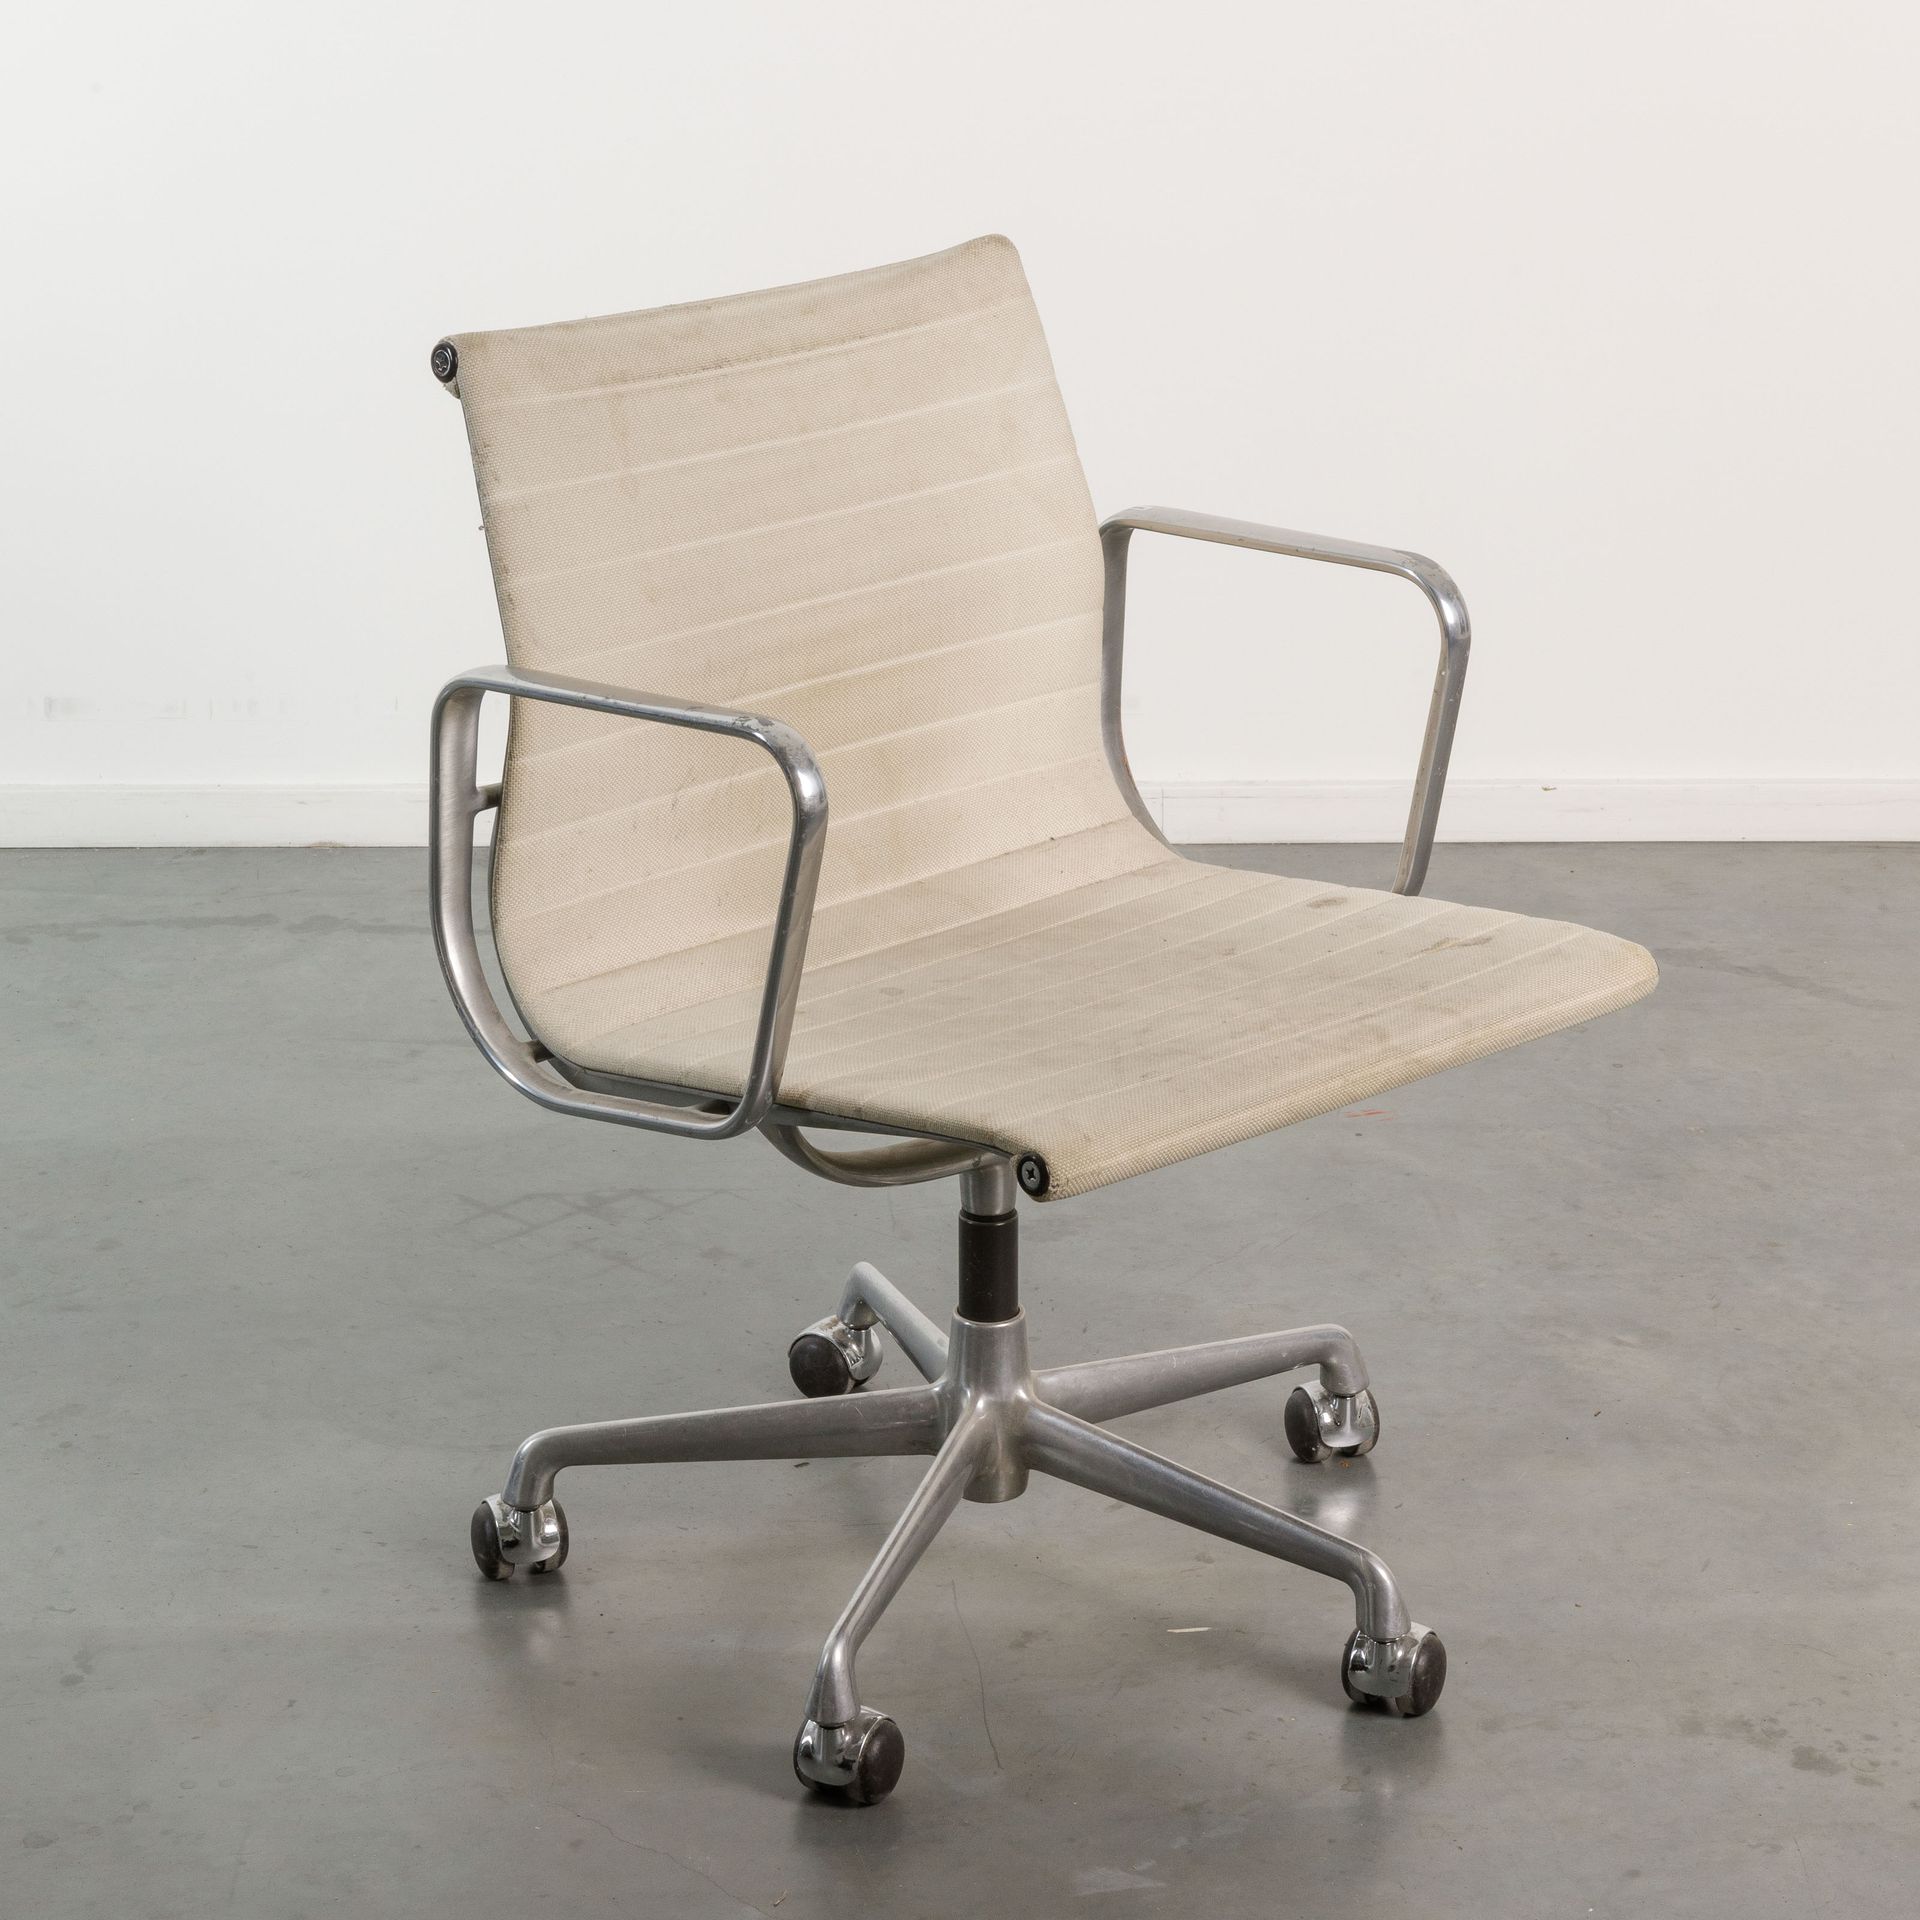 CHARLES EAMES (1907-1978) / VITRA Office chair. Design from 1958. Later version.&hellip;